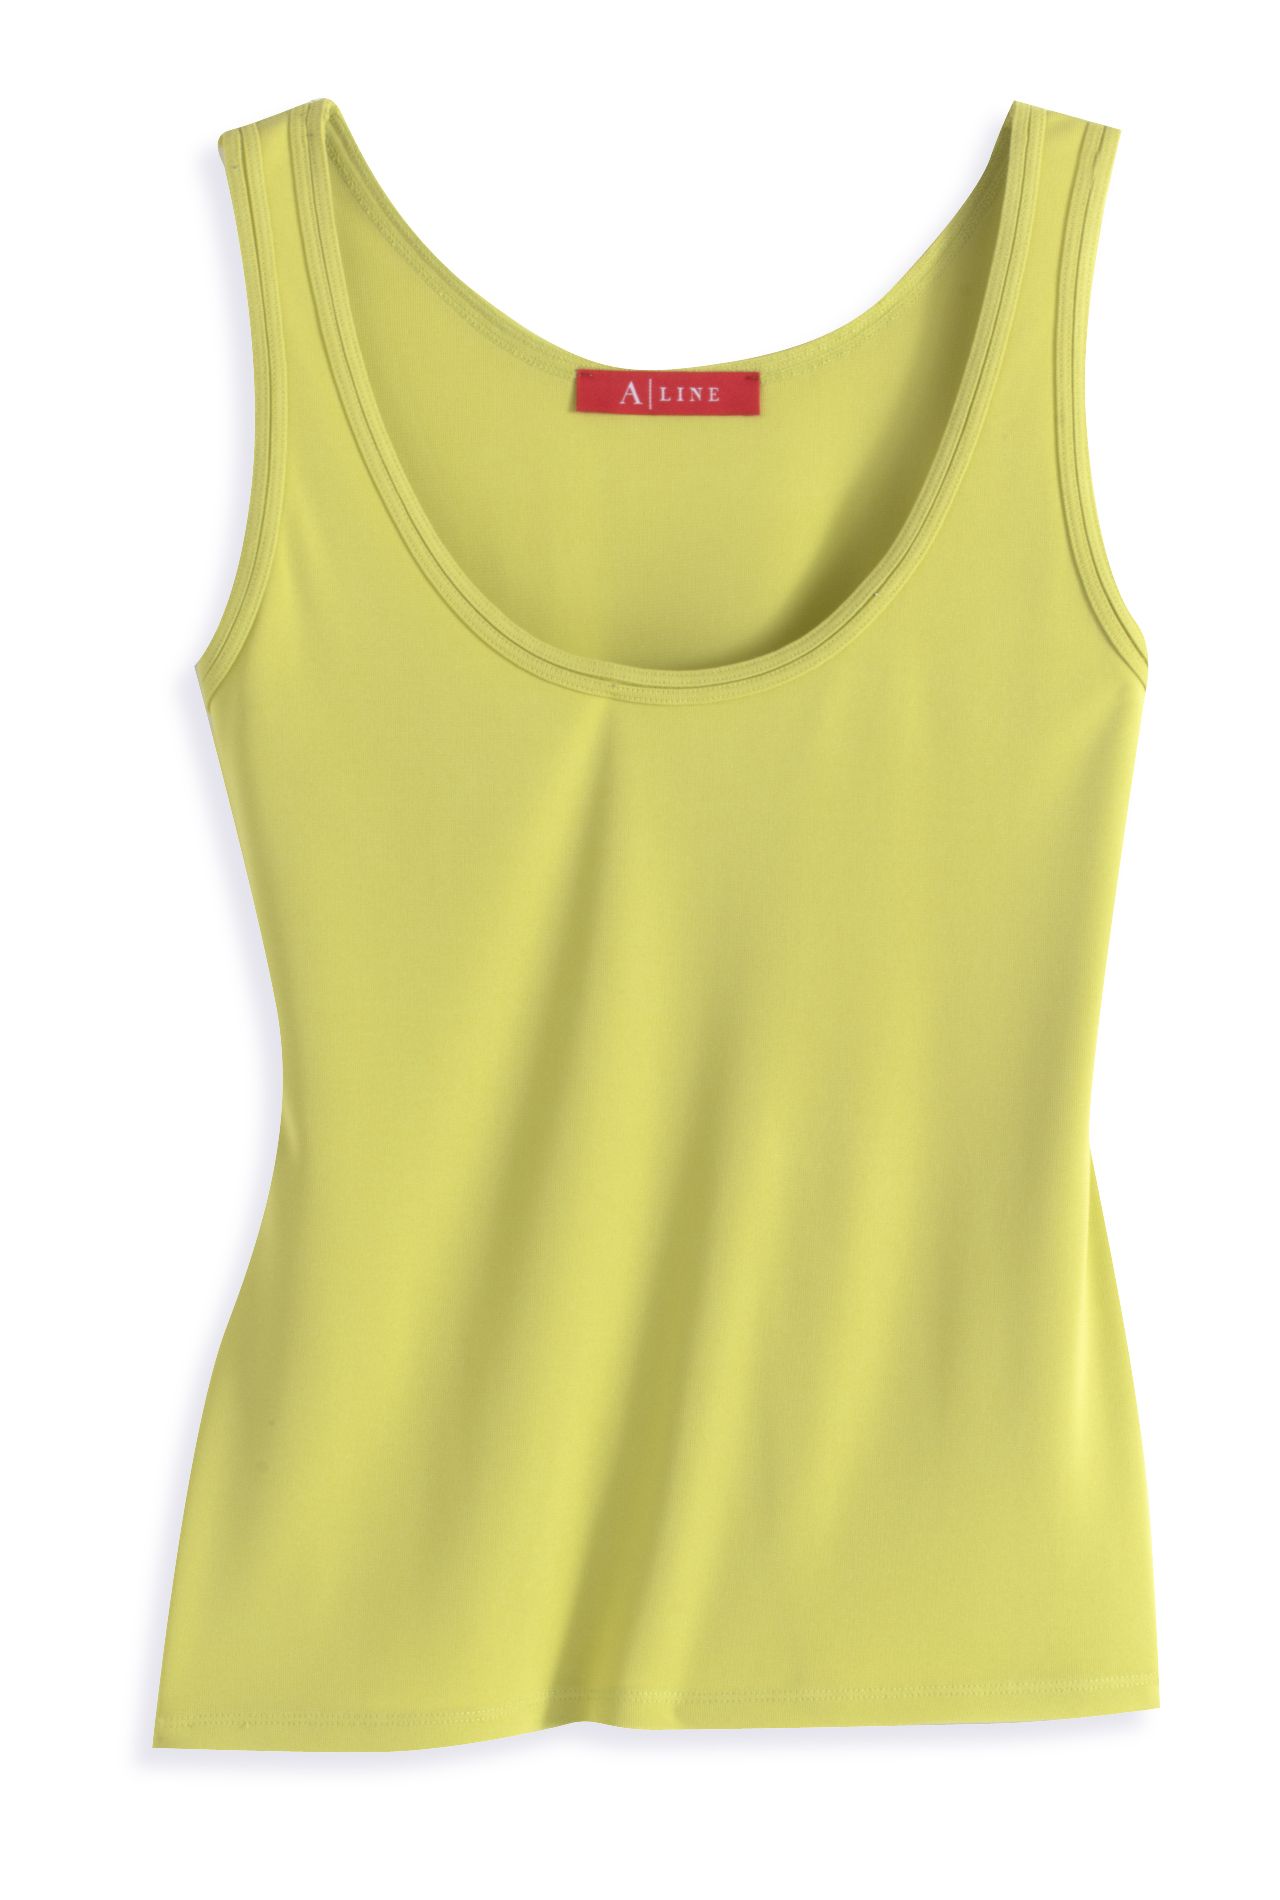 A-Line Women's Plus Sleeveless Tank Top with Binding Detail